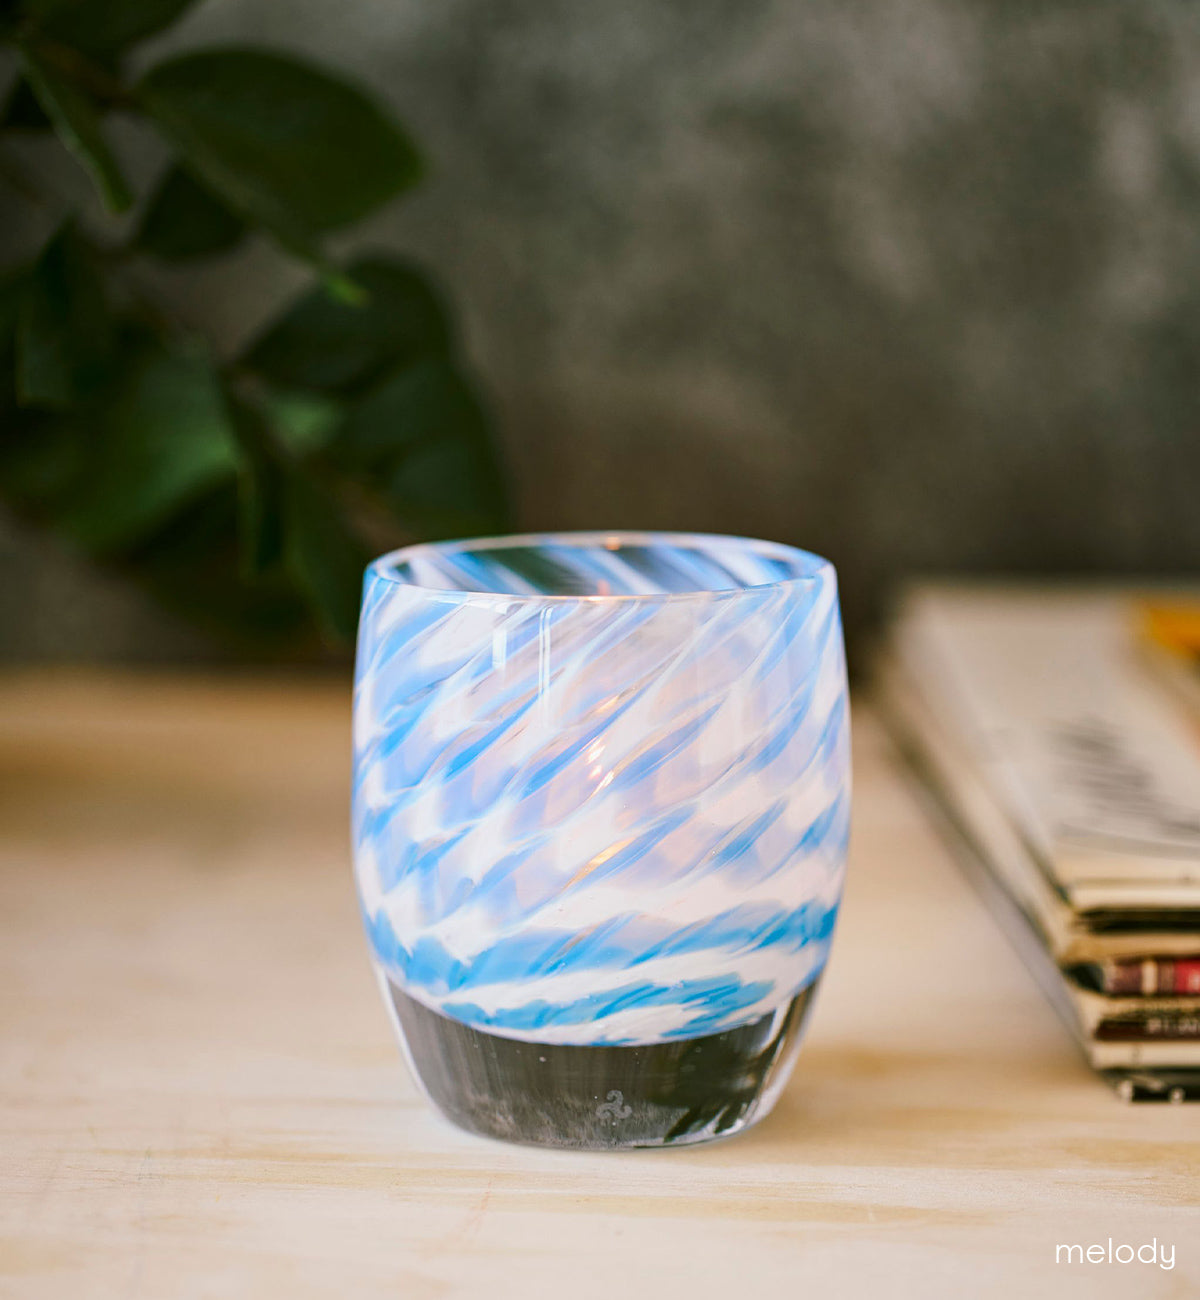 melody, sweeping swirled blue and white hand-blown glass votive candle holder on a light wood table with plant and stack of magazines in background.